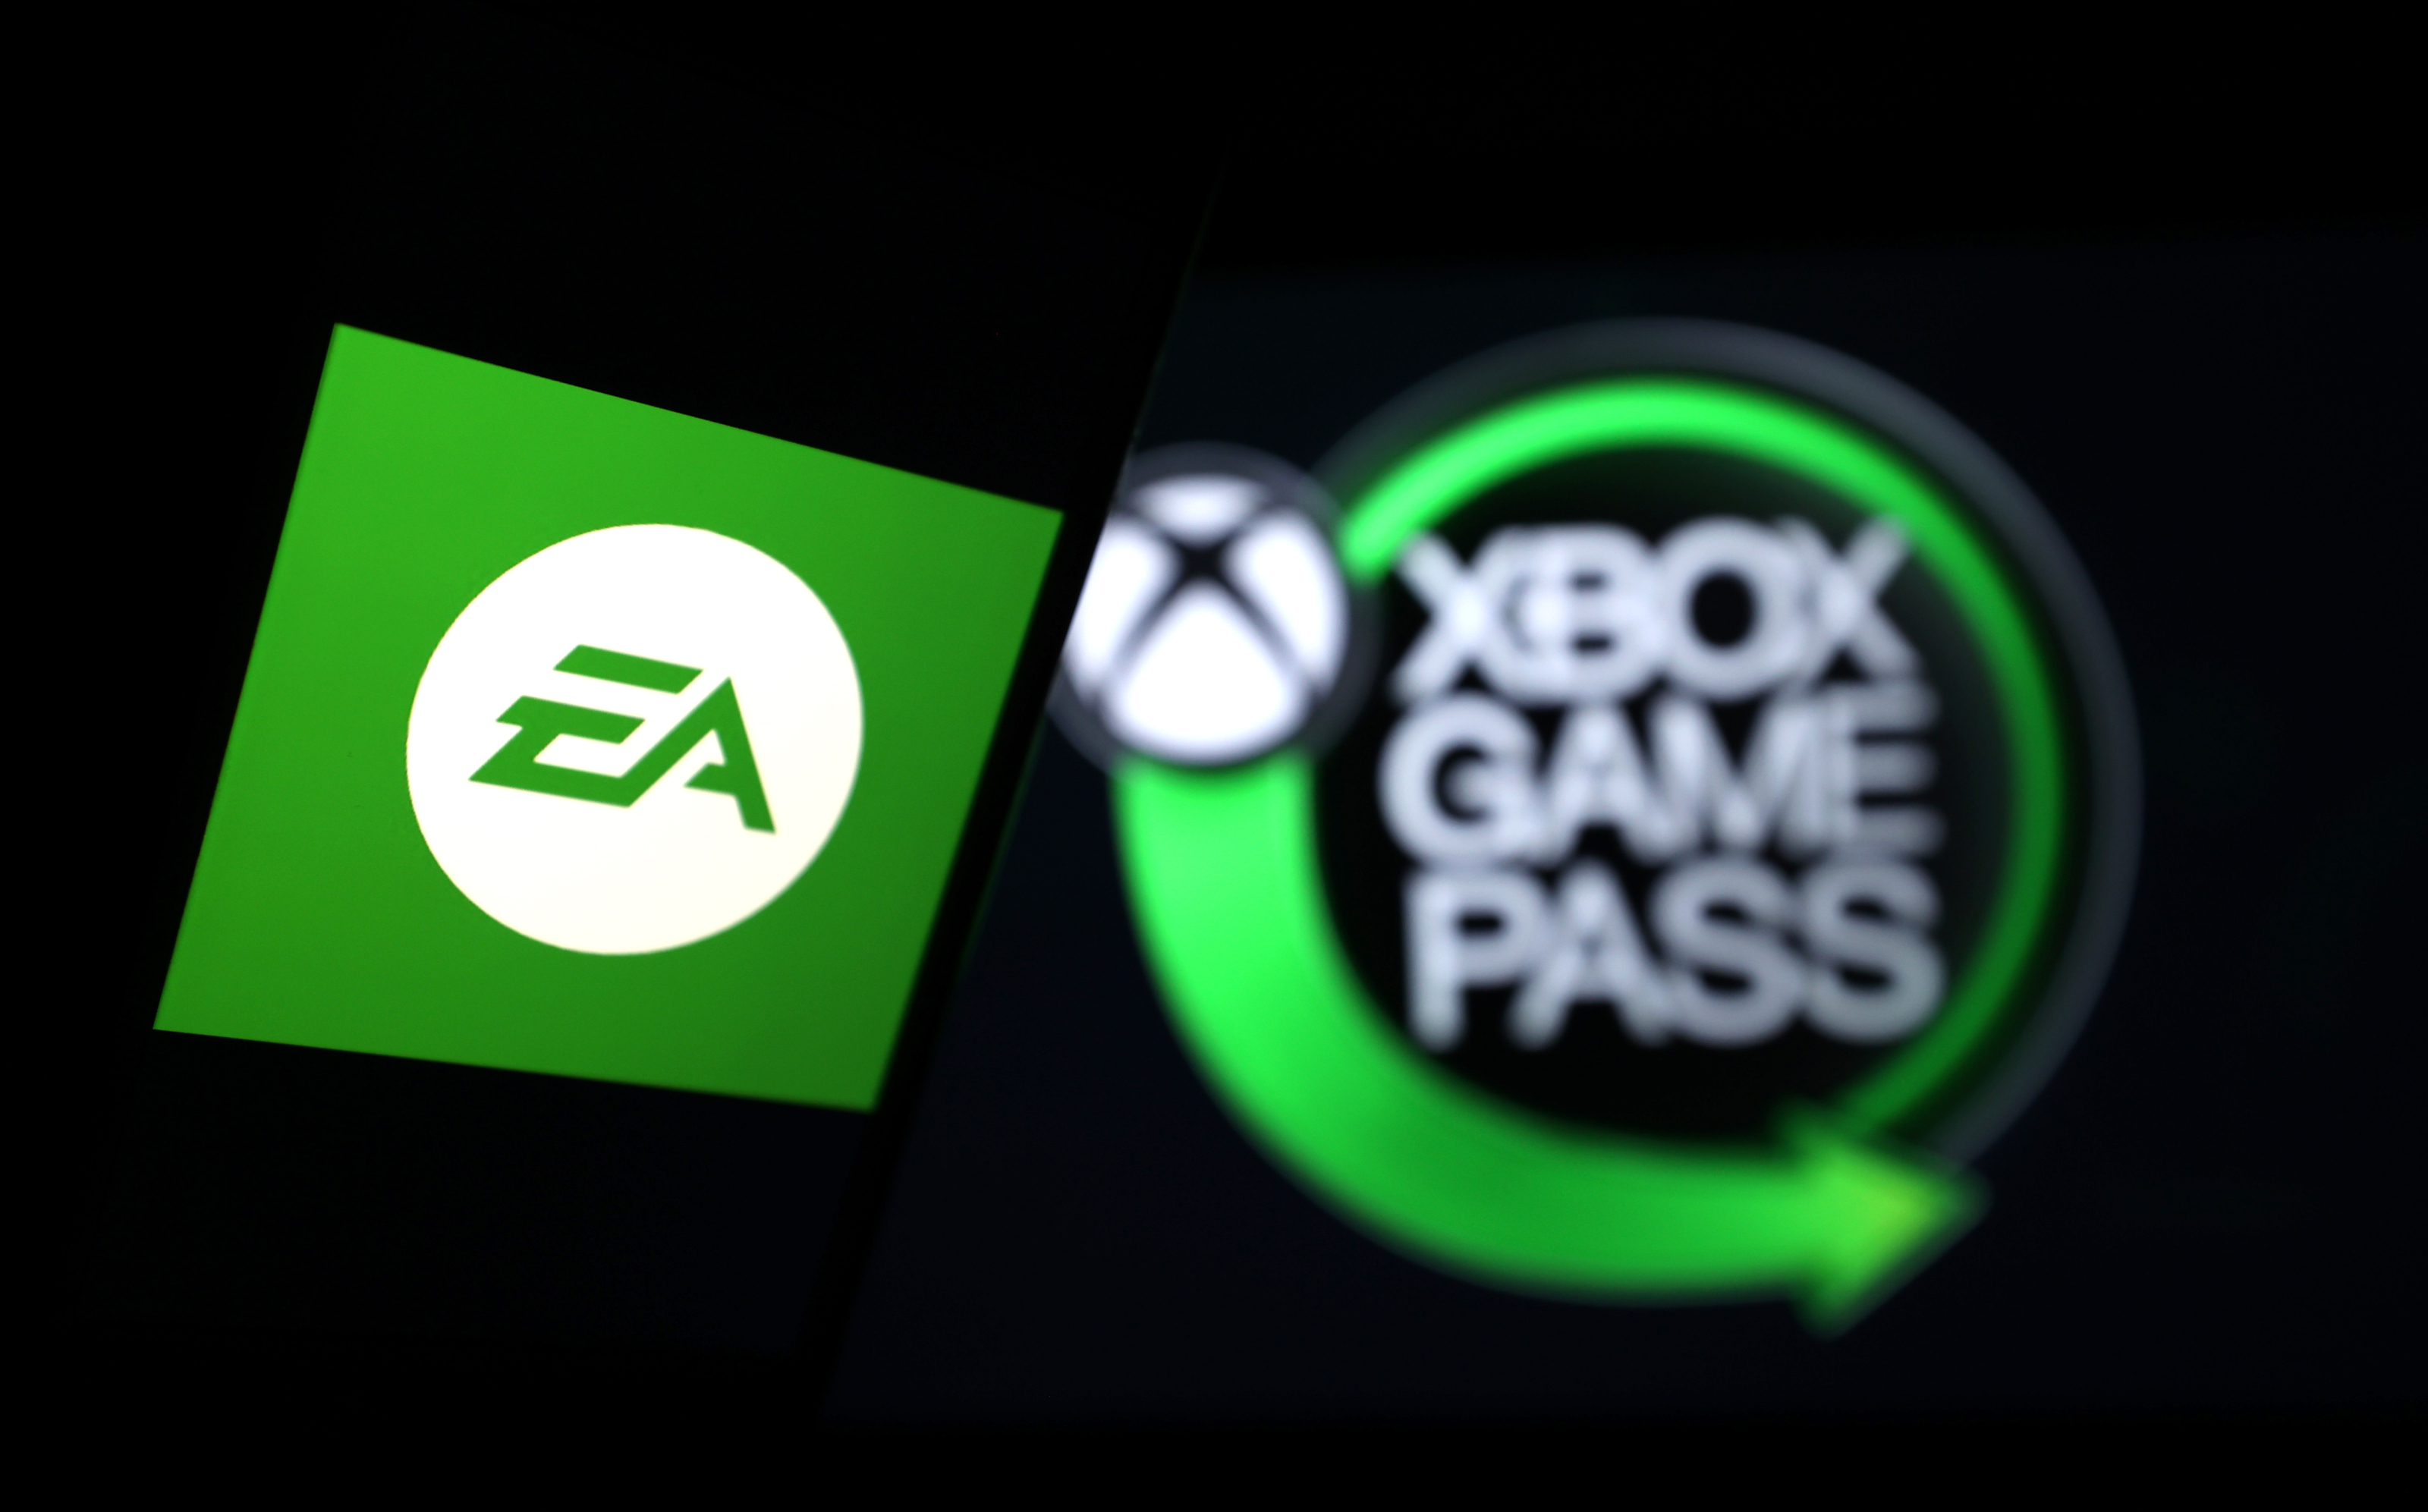 Can Xbox Game Pass with EA Play preload? : r/battlefield2042